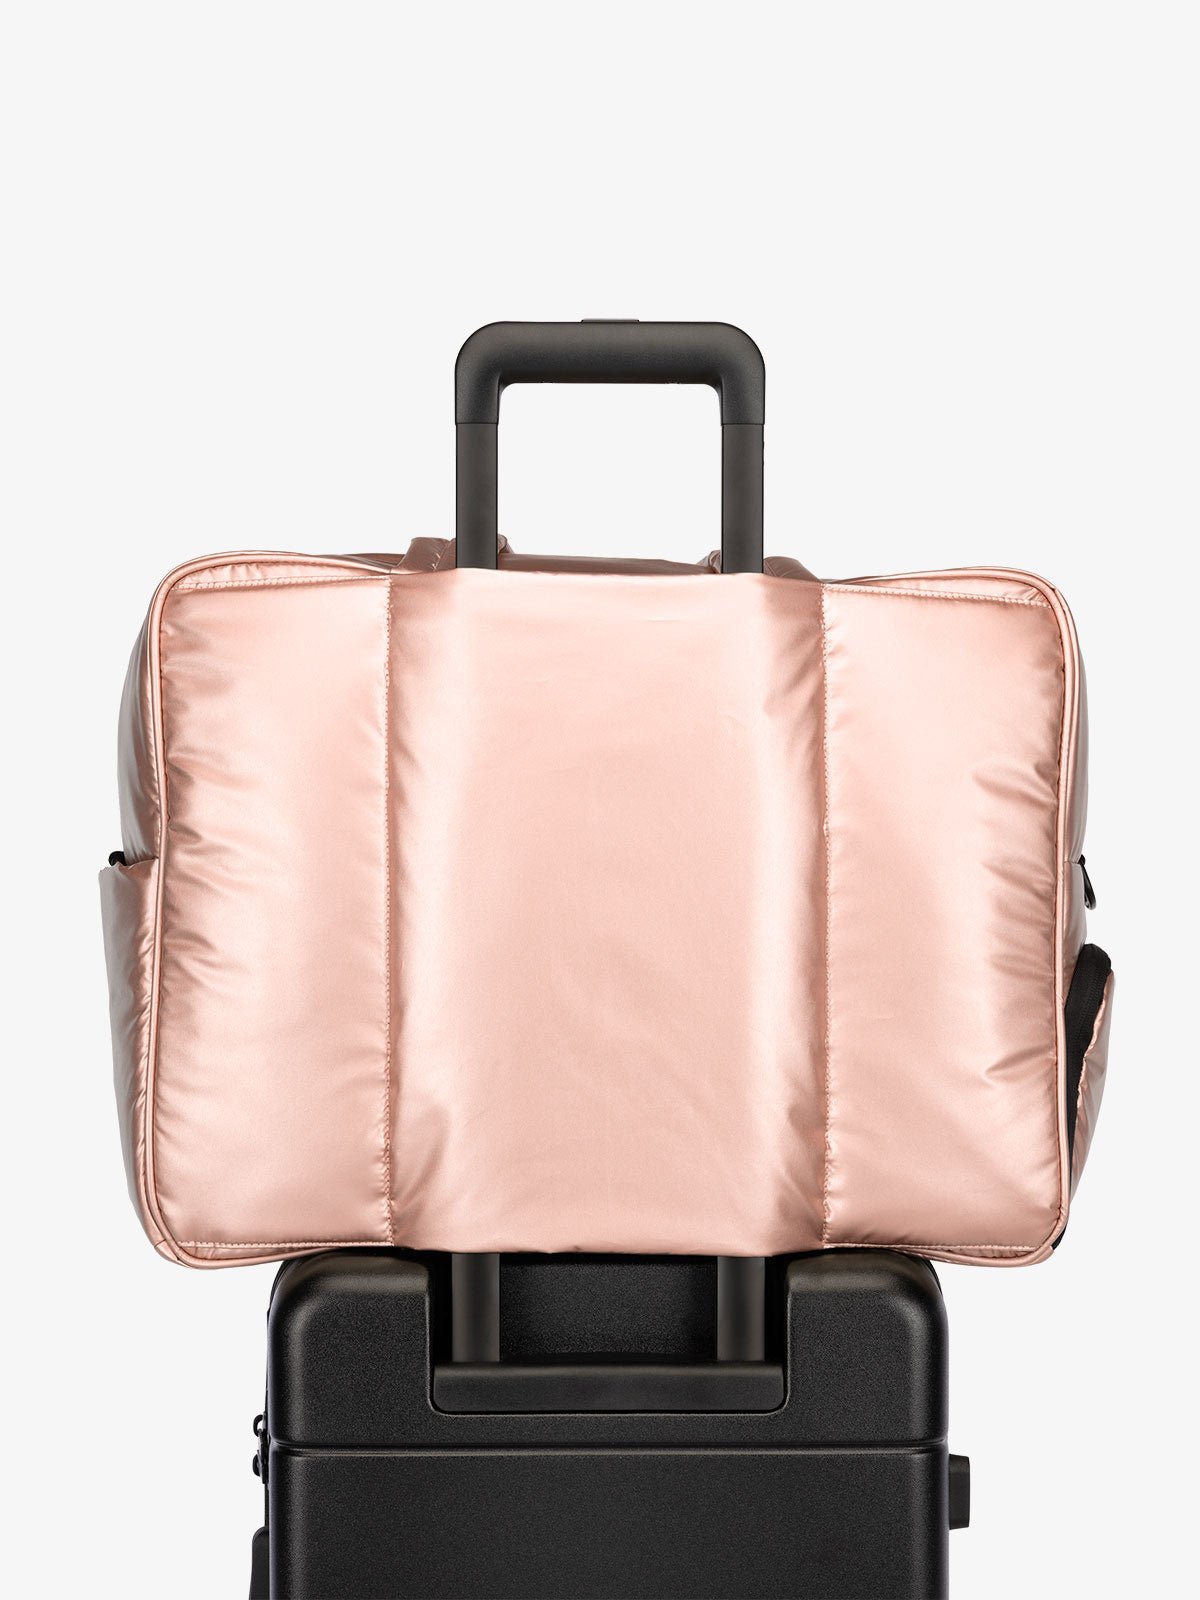 CALPAK Luka large travel duffel bag with trolley sleeve for luggage in rose gold